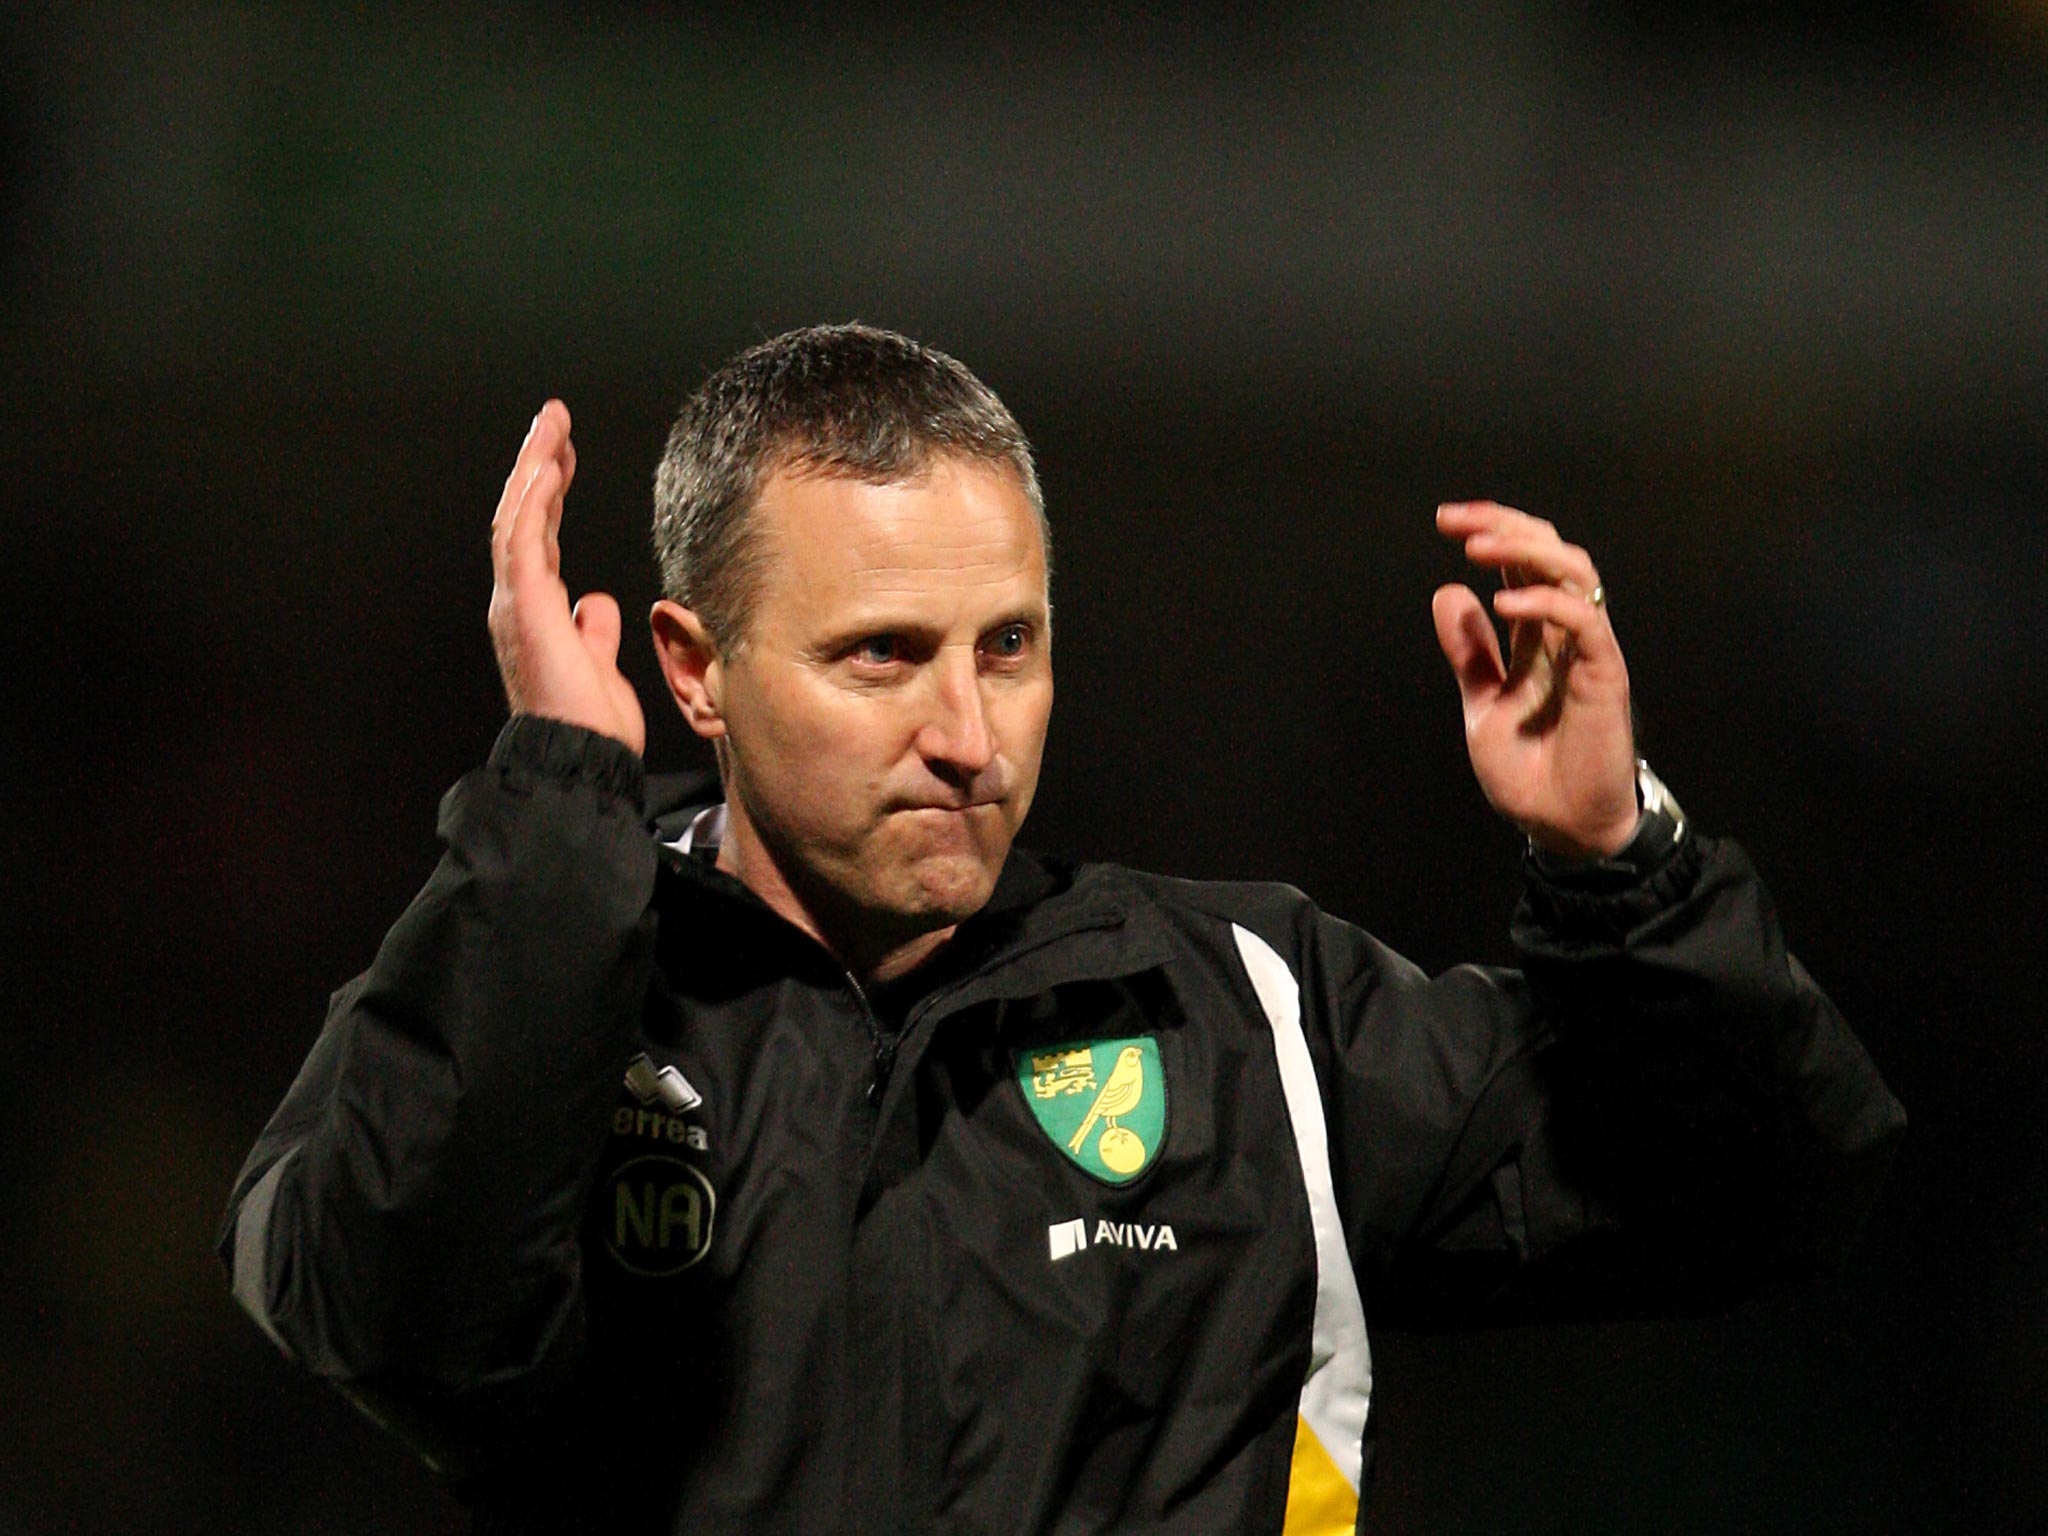 Neil Adams has been given five matches to keep Norwich in the Premier League after Chris Hughton was sacked